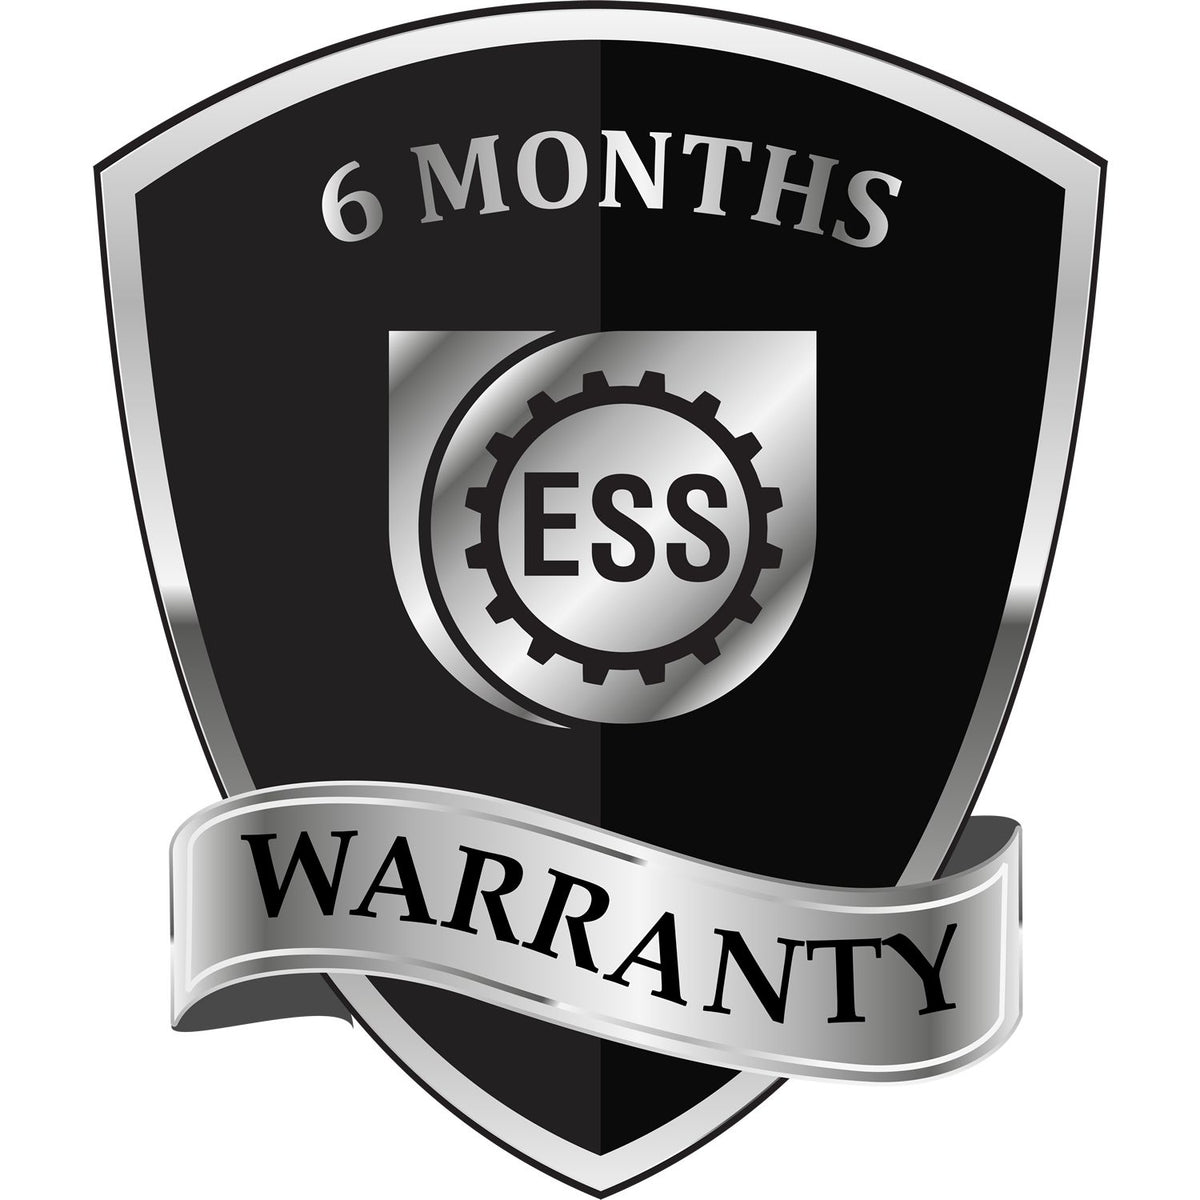 A badge or emblem showing a warranty icon for the Louisiana Professional Engineer Seal Stamp